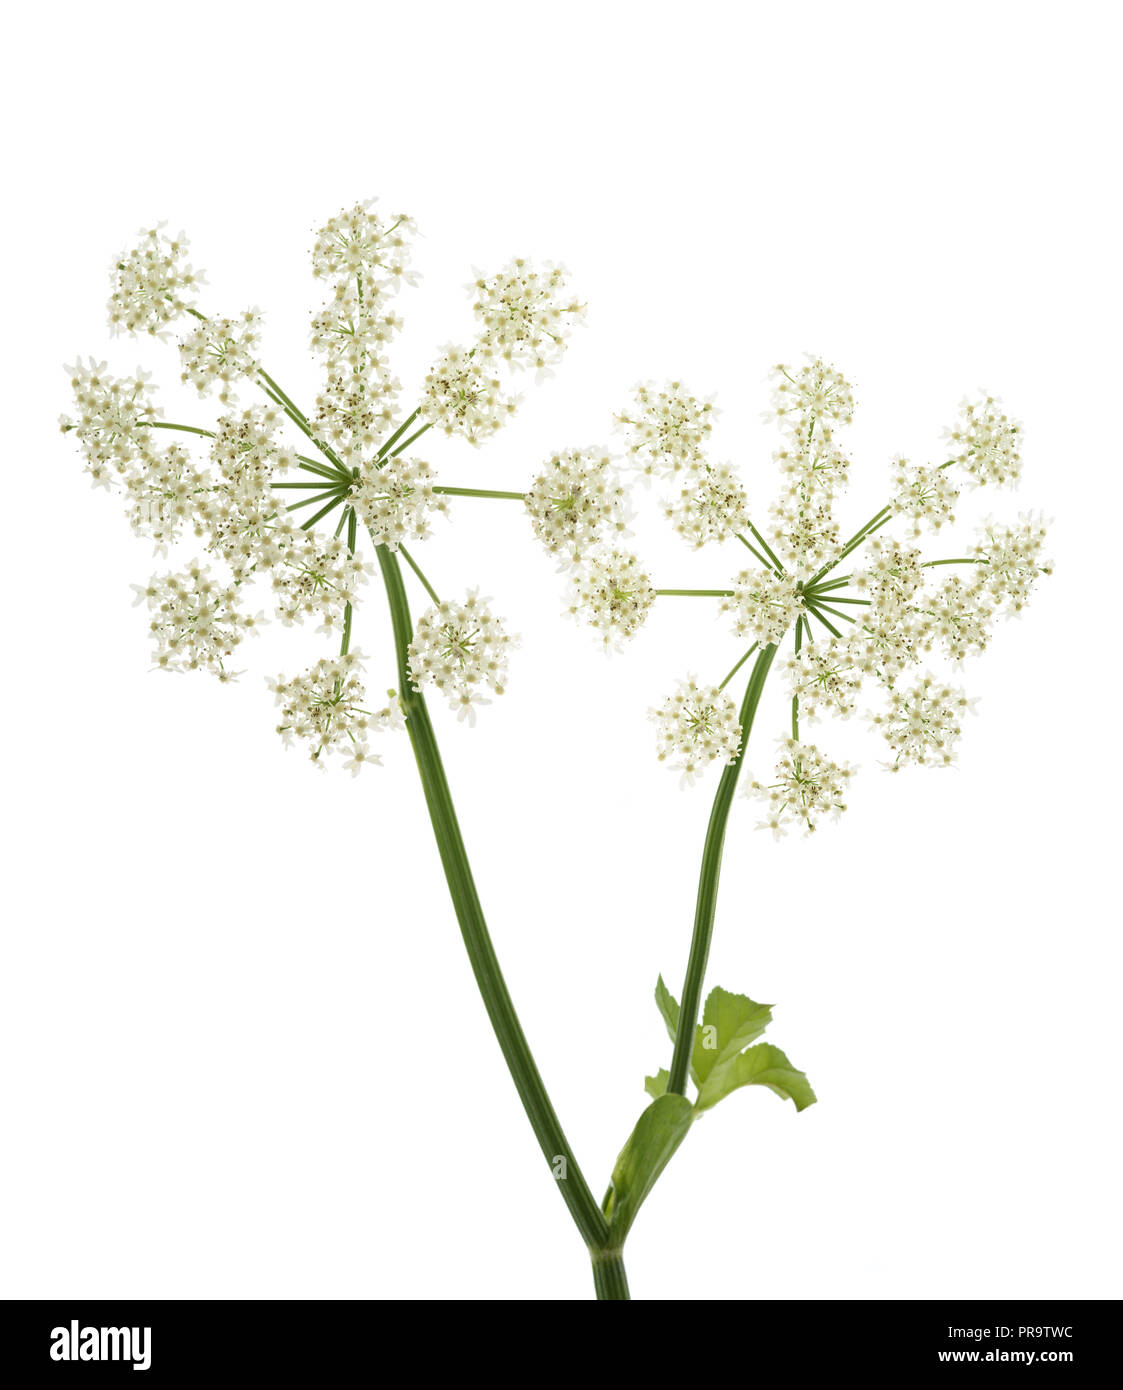 Angelica archangelica flowers isolated on white background Stock Photo